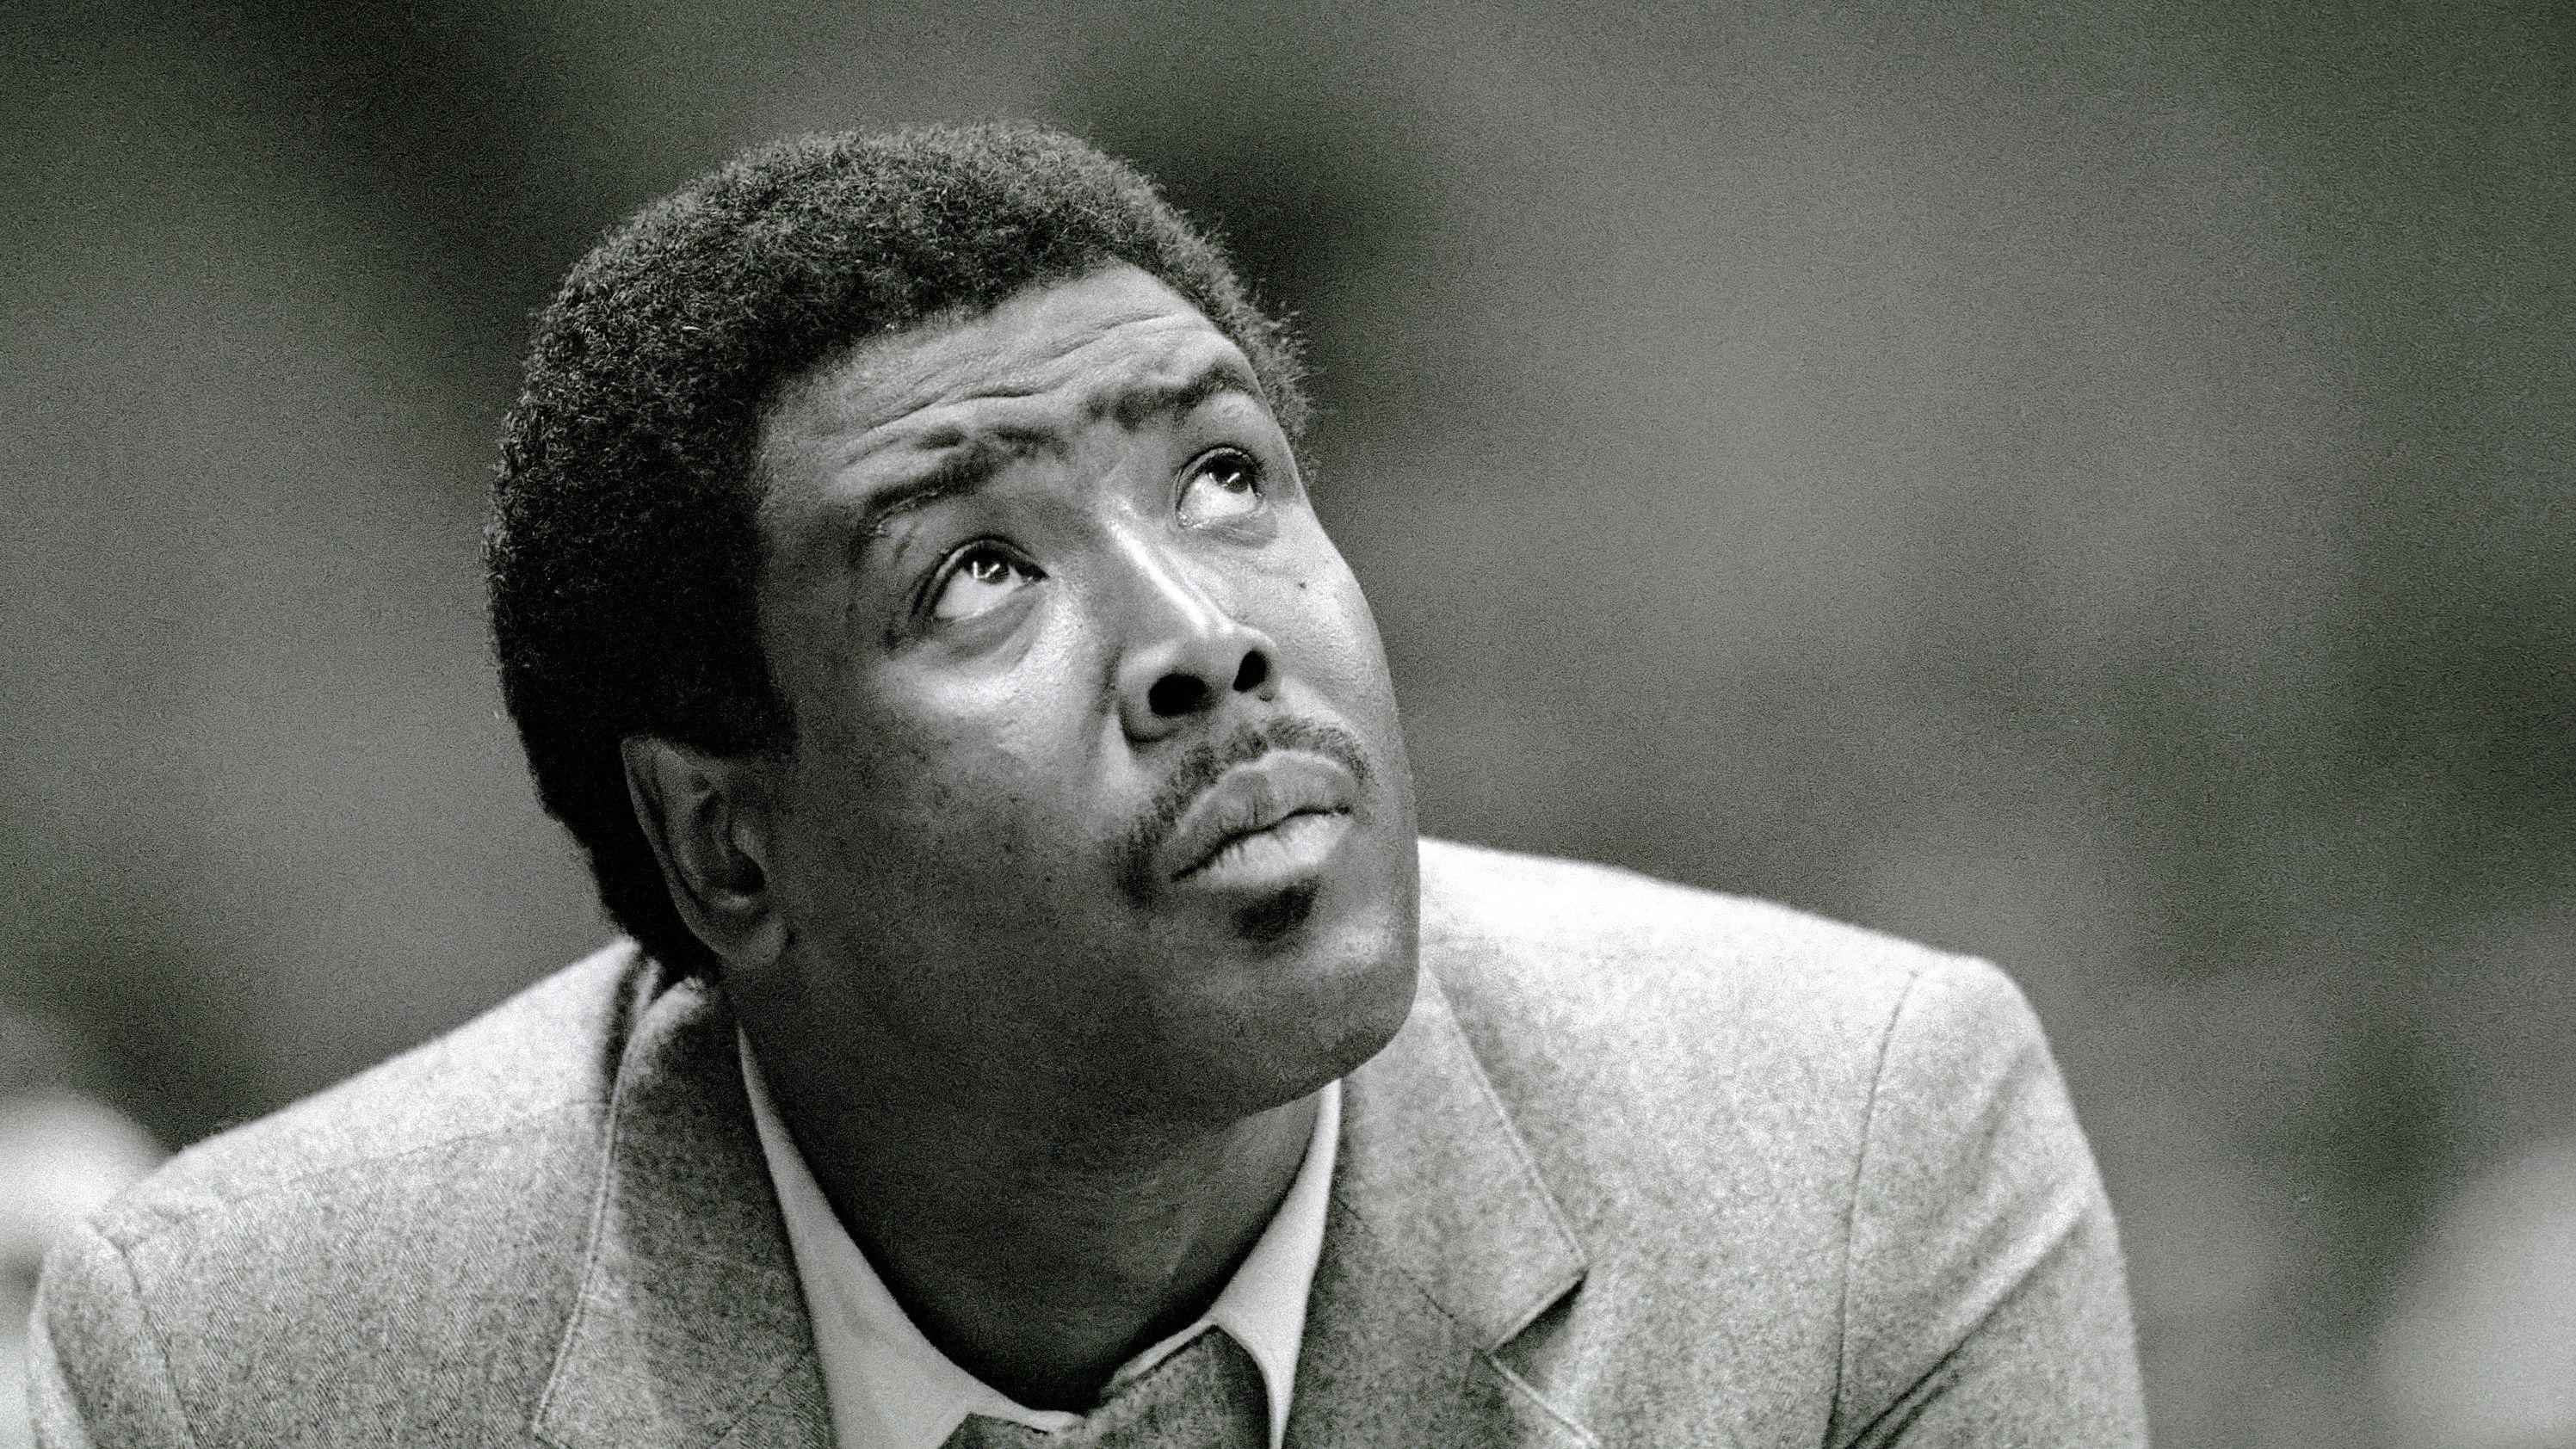 Former NBA All-Star and longtime head coach <a href="https://www.cnn.com/2022/12/11/us/paul-silas-nba-player-coach-obit-spt-intl/index.html" target="_blank">Paul Silas</a> died at the of age 79 on December 11. Silas was a three-time NBA champion in his 16 seasons as a player.